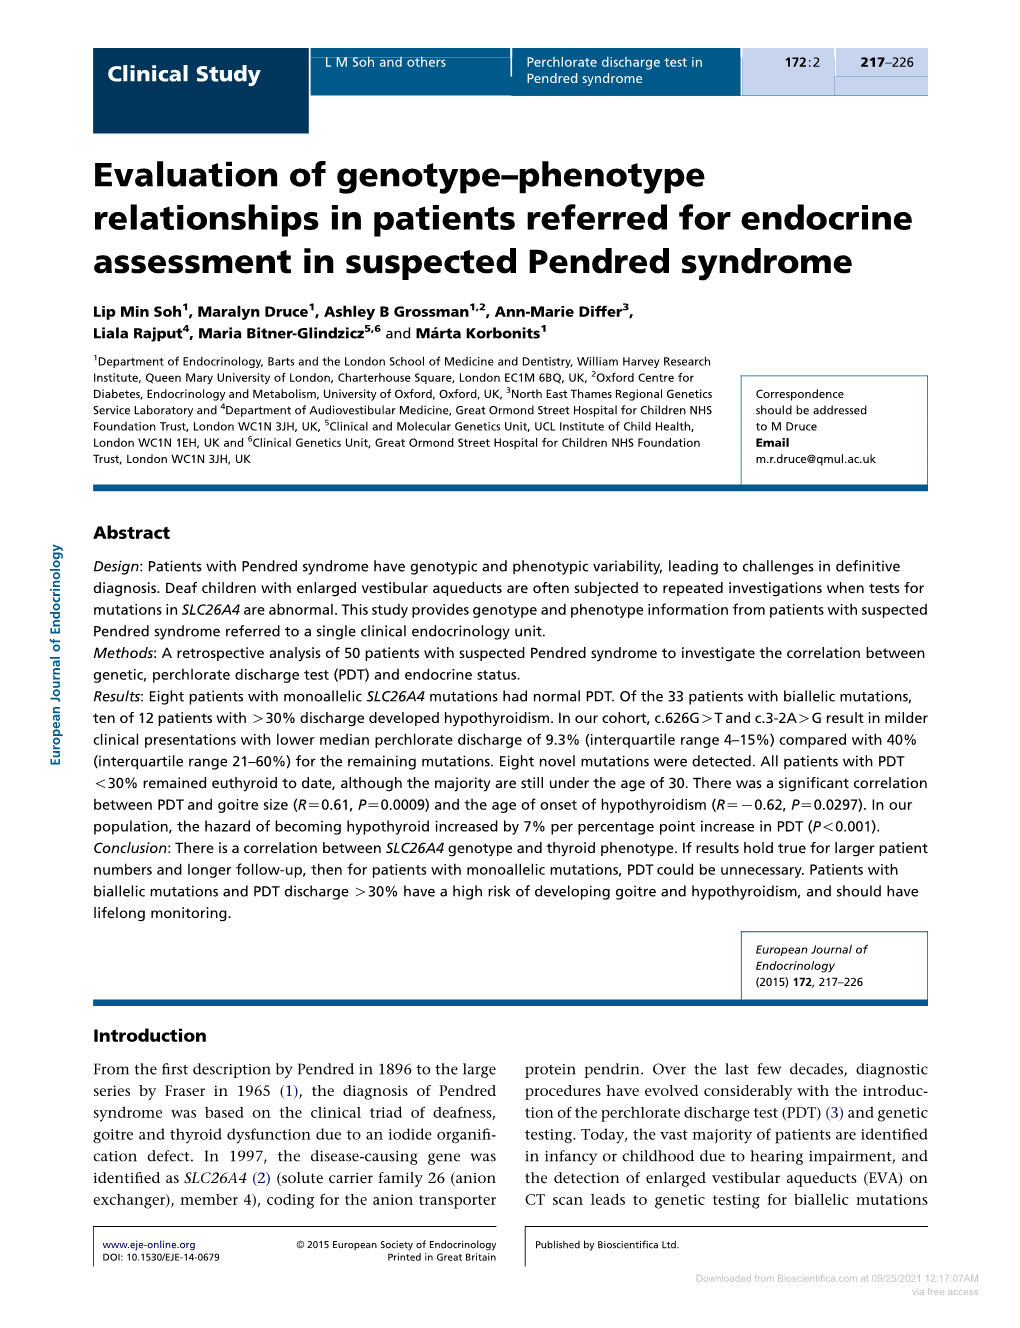 Evaluation of Genotype–Phenotype Relationships in Patients Referred for Endocrine Assessment in Suspected Pendred Syndrome